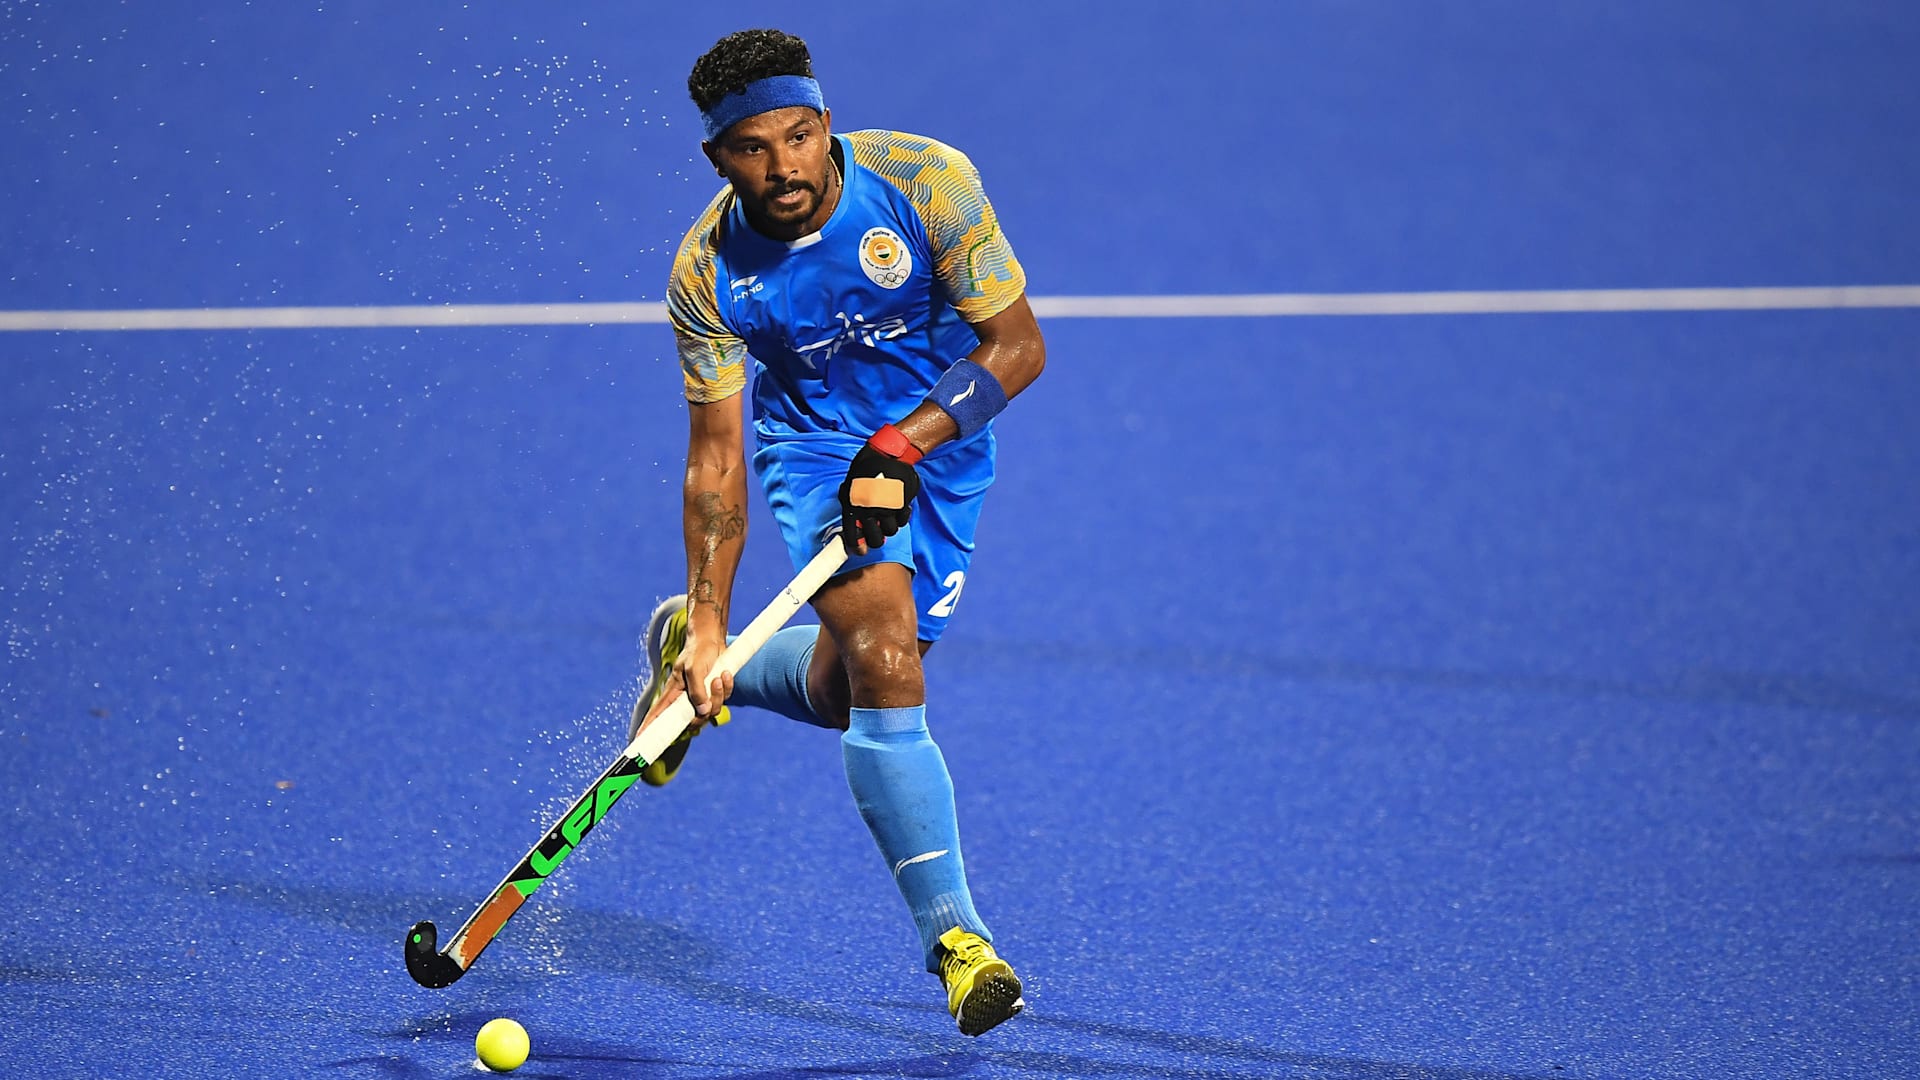 Asia Cup hockey 2022: Get schedule and watch telecast and live streaming in India